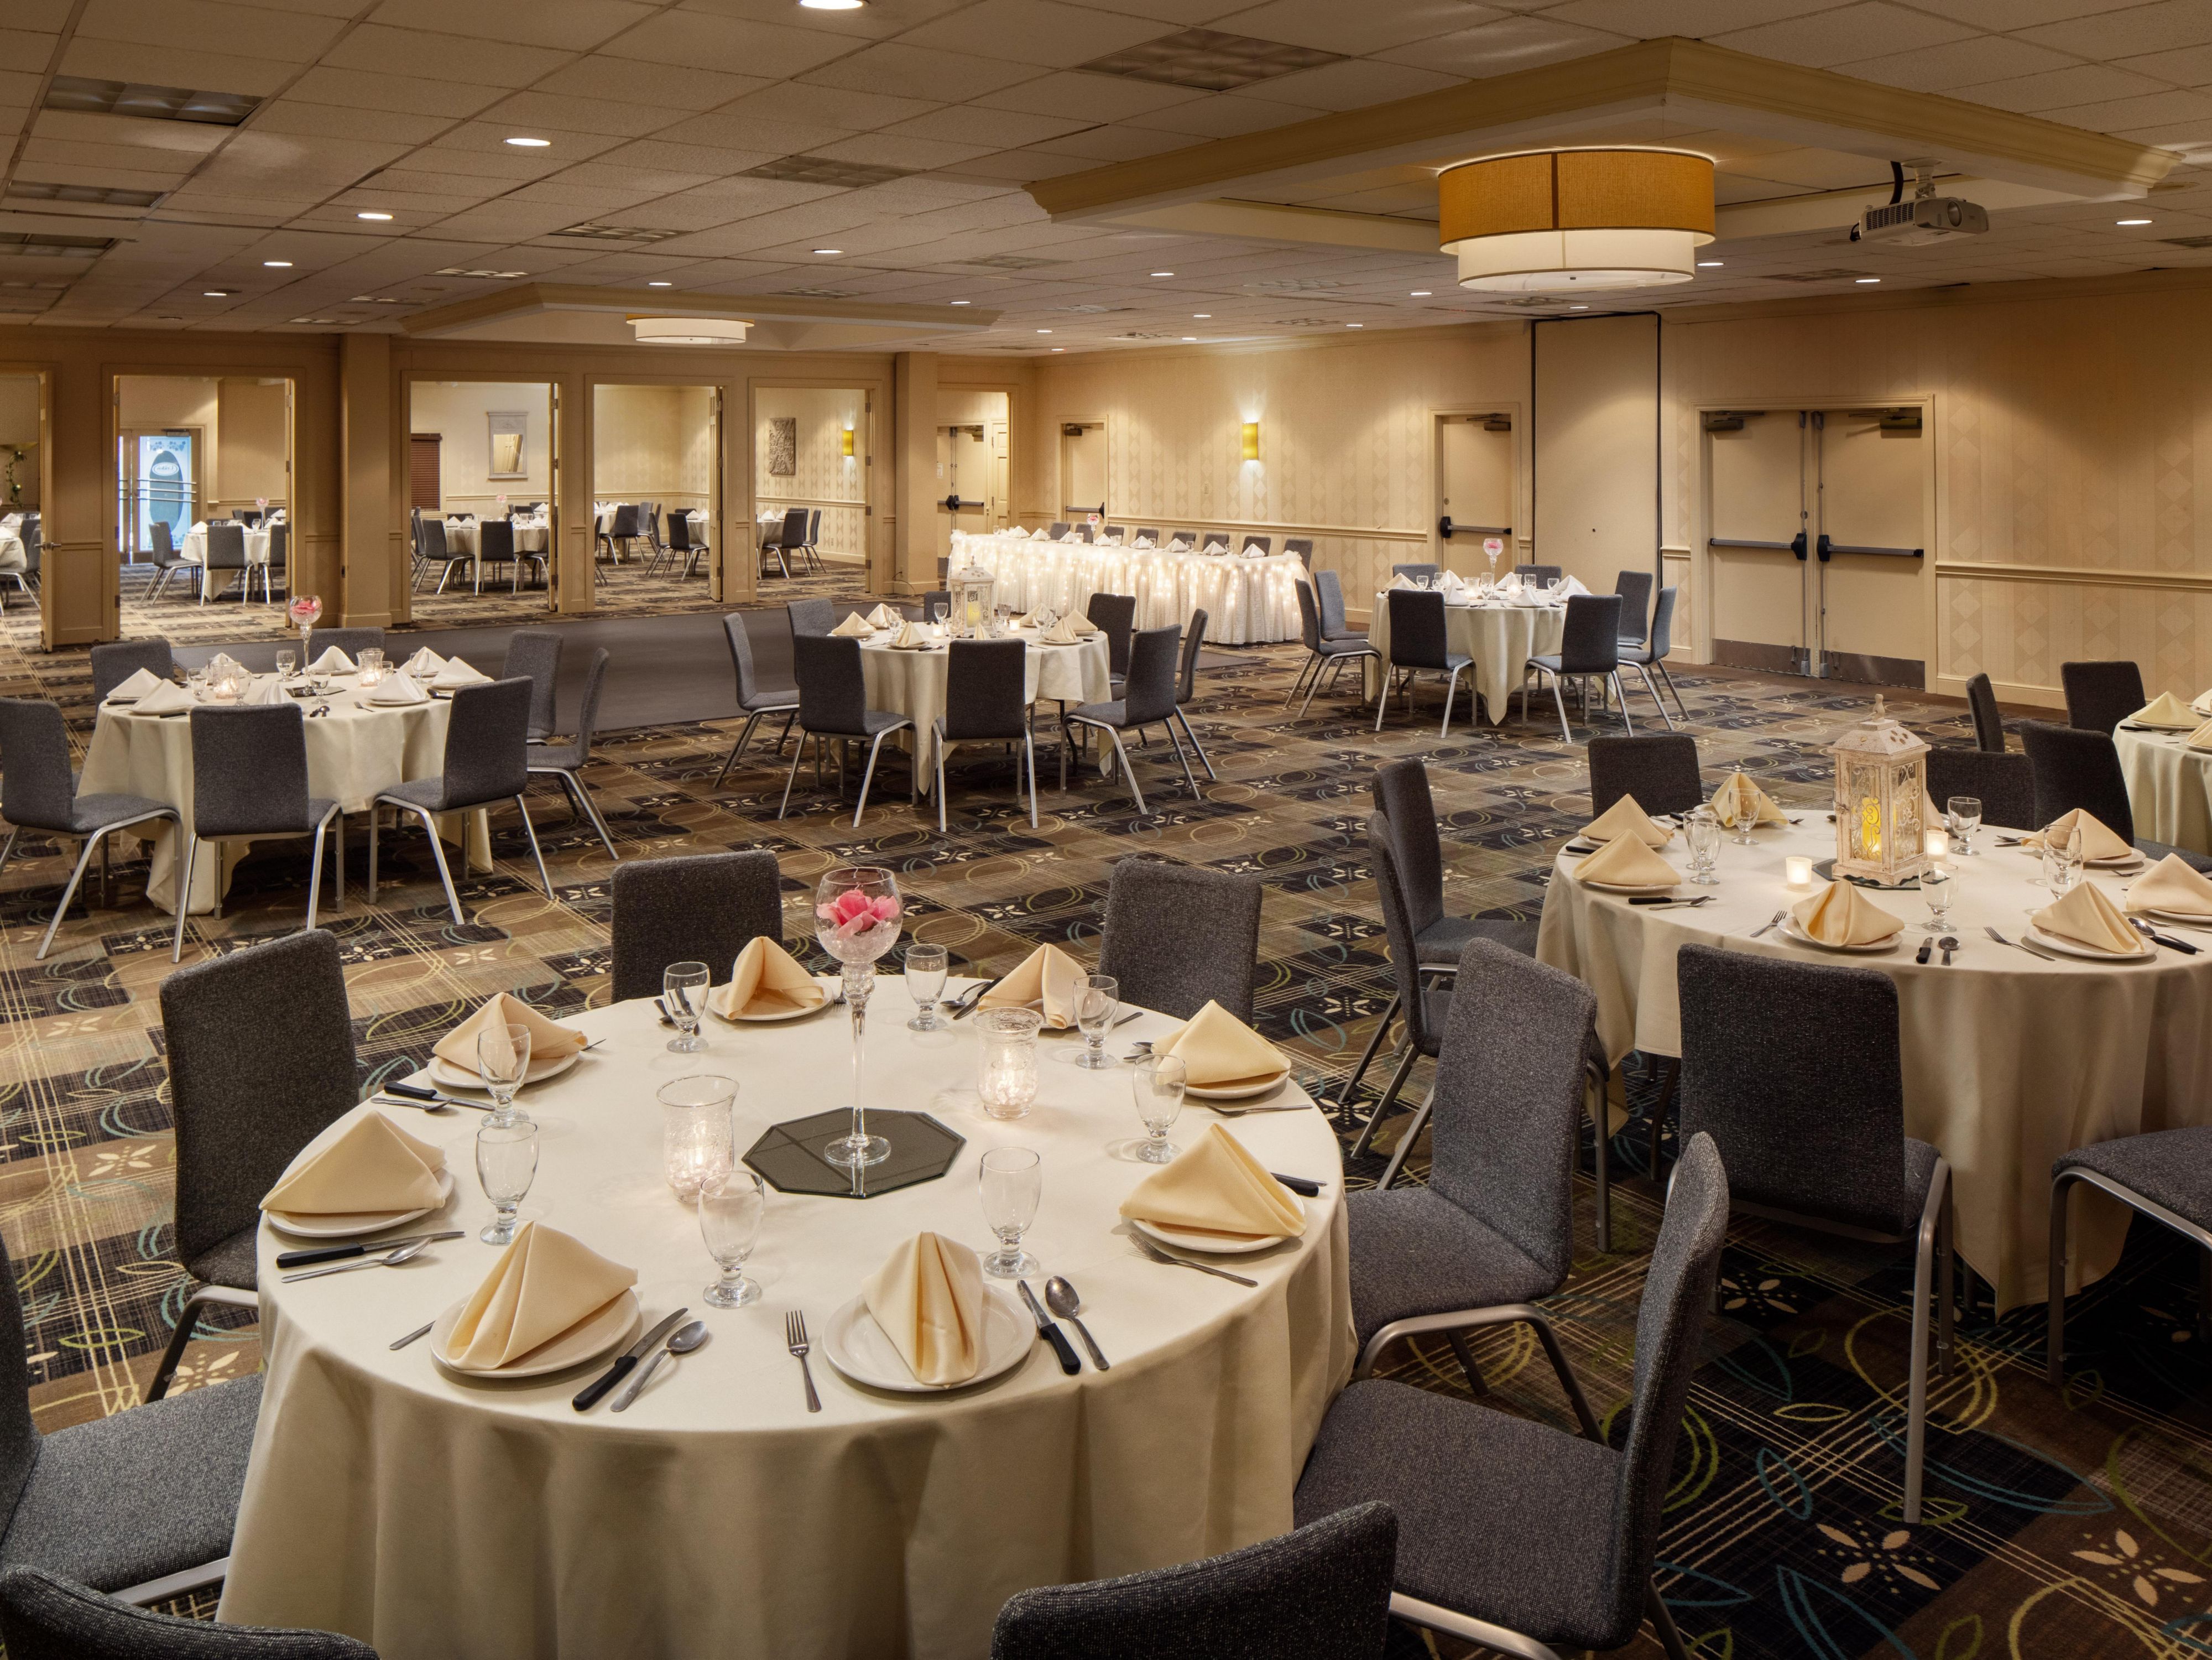 Getting married in the Weirton or Steubenville Area? Let us host all your guests at a courtesy rate-100% free to you. Click on the link for more information or reach out to Brad Degenkolb at Brad@HolidayInnWeirton.com or 304-723-5522 to learn more.